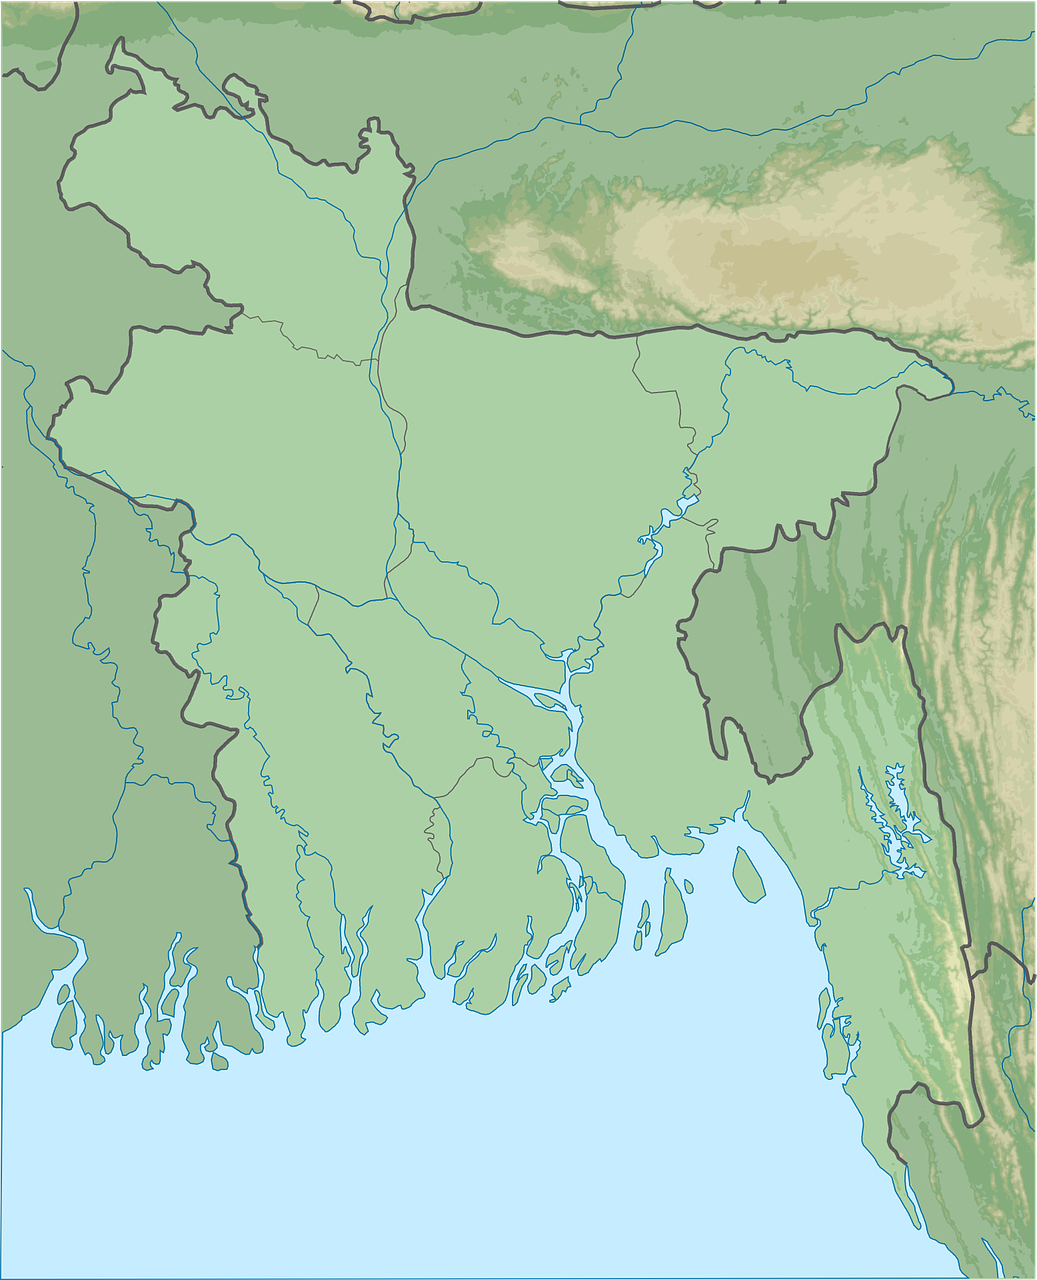 Bangladesh Physical Map Geography Cartography Free Image From Needpix Com